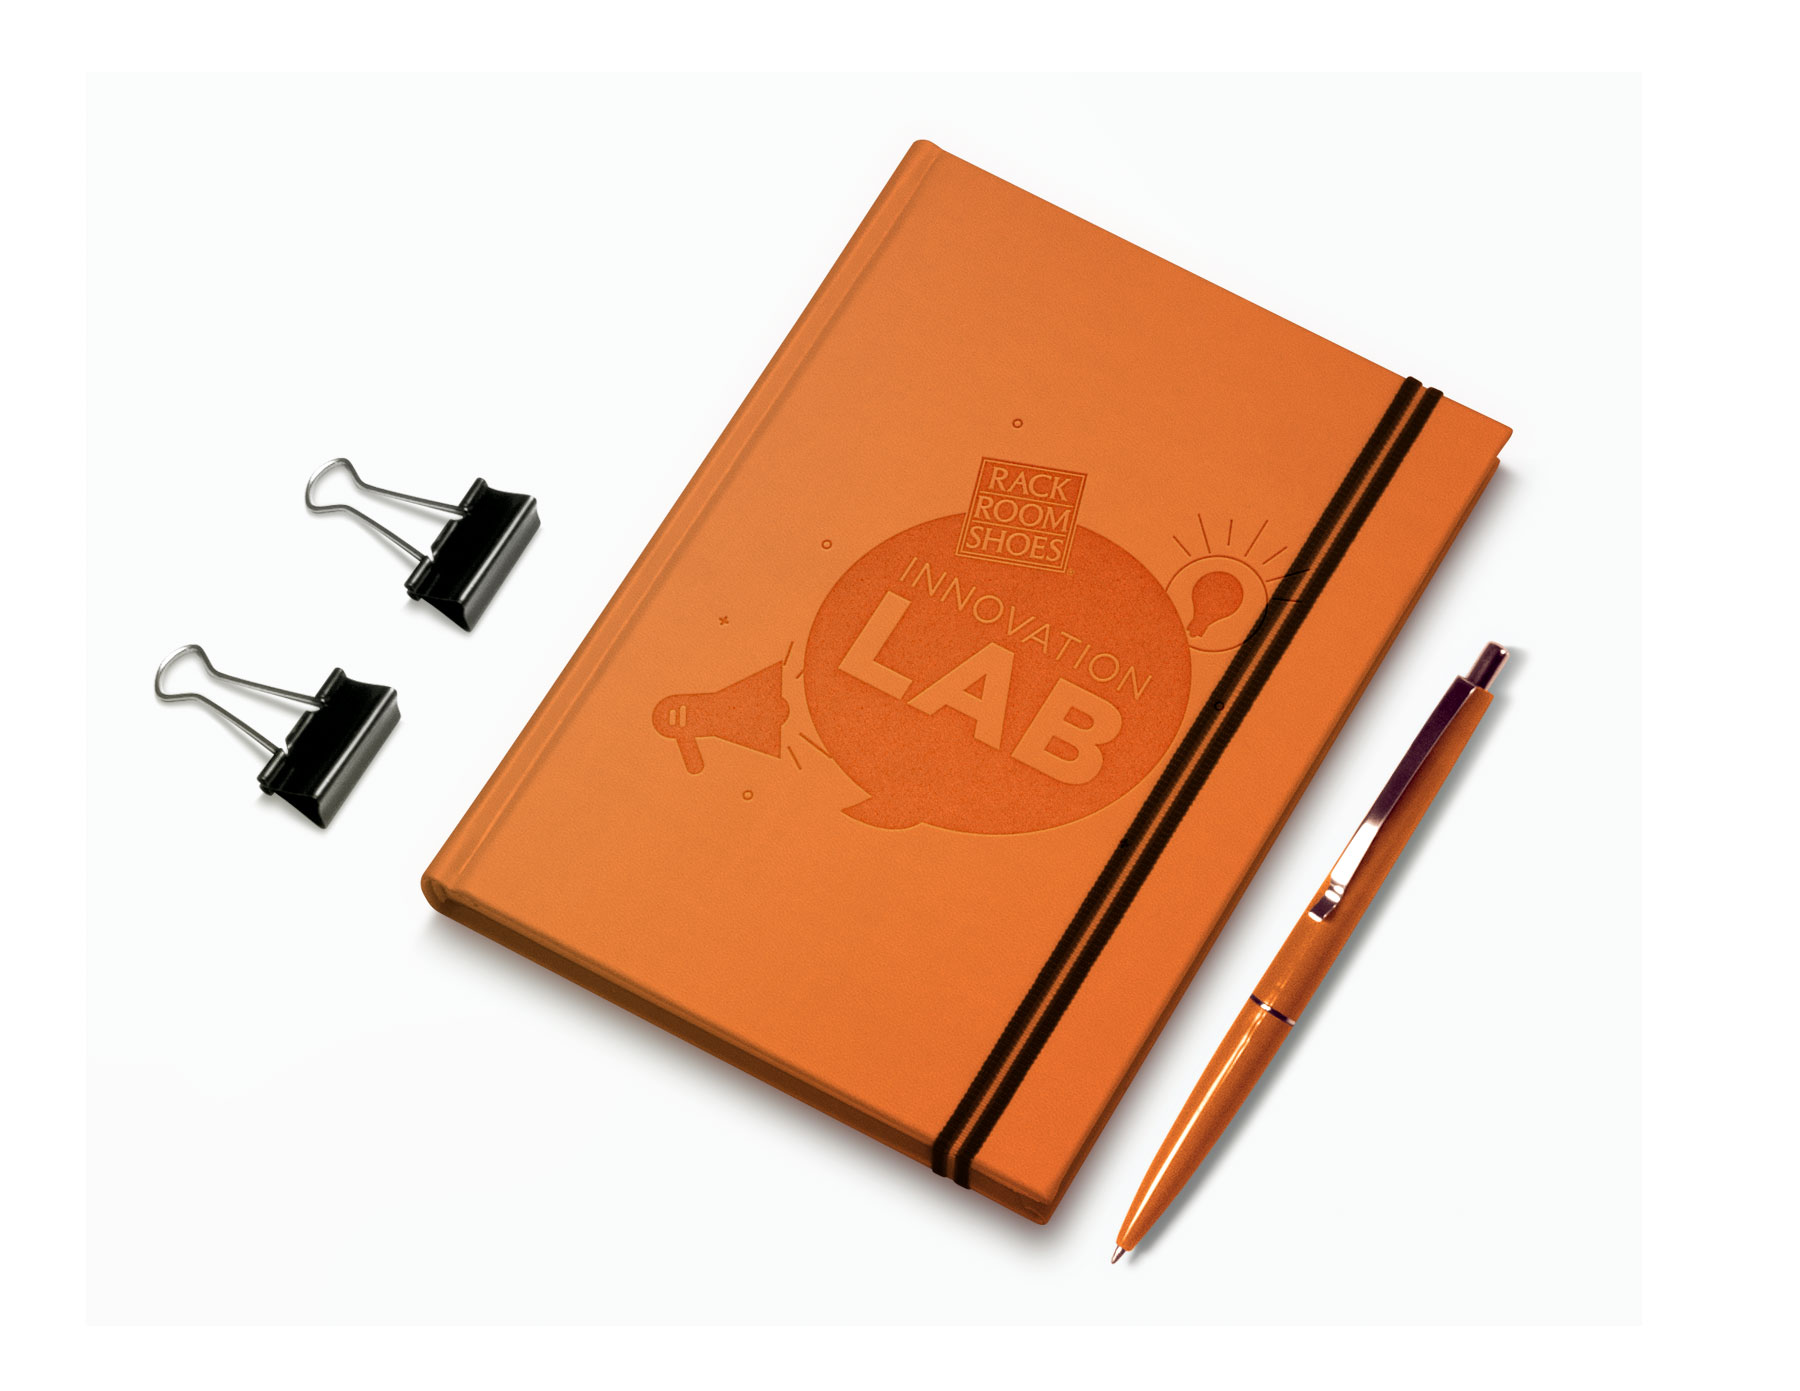 a small orange notebook with the innovation lab logo engraved into it